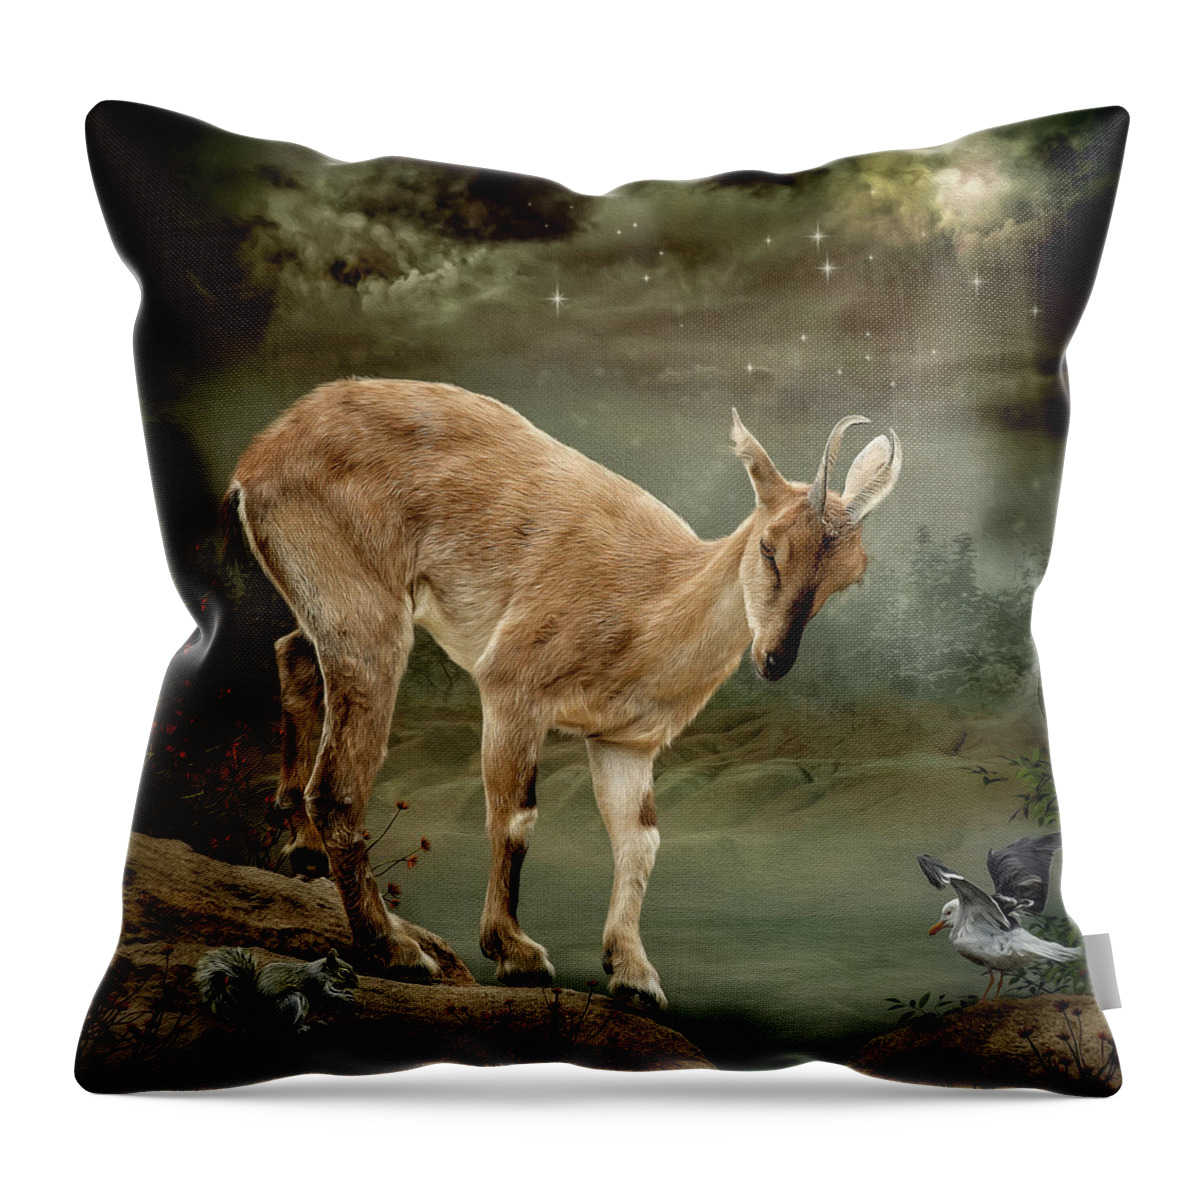 Goat Throw Pillow featuring the digital art Sure Footed by Maggy Pease